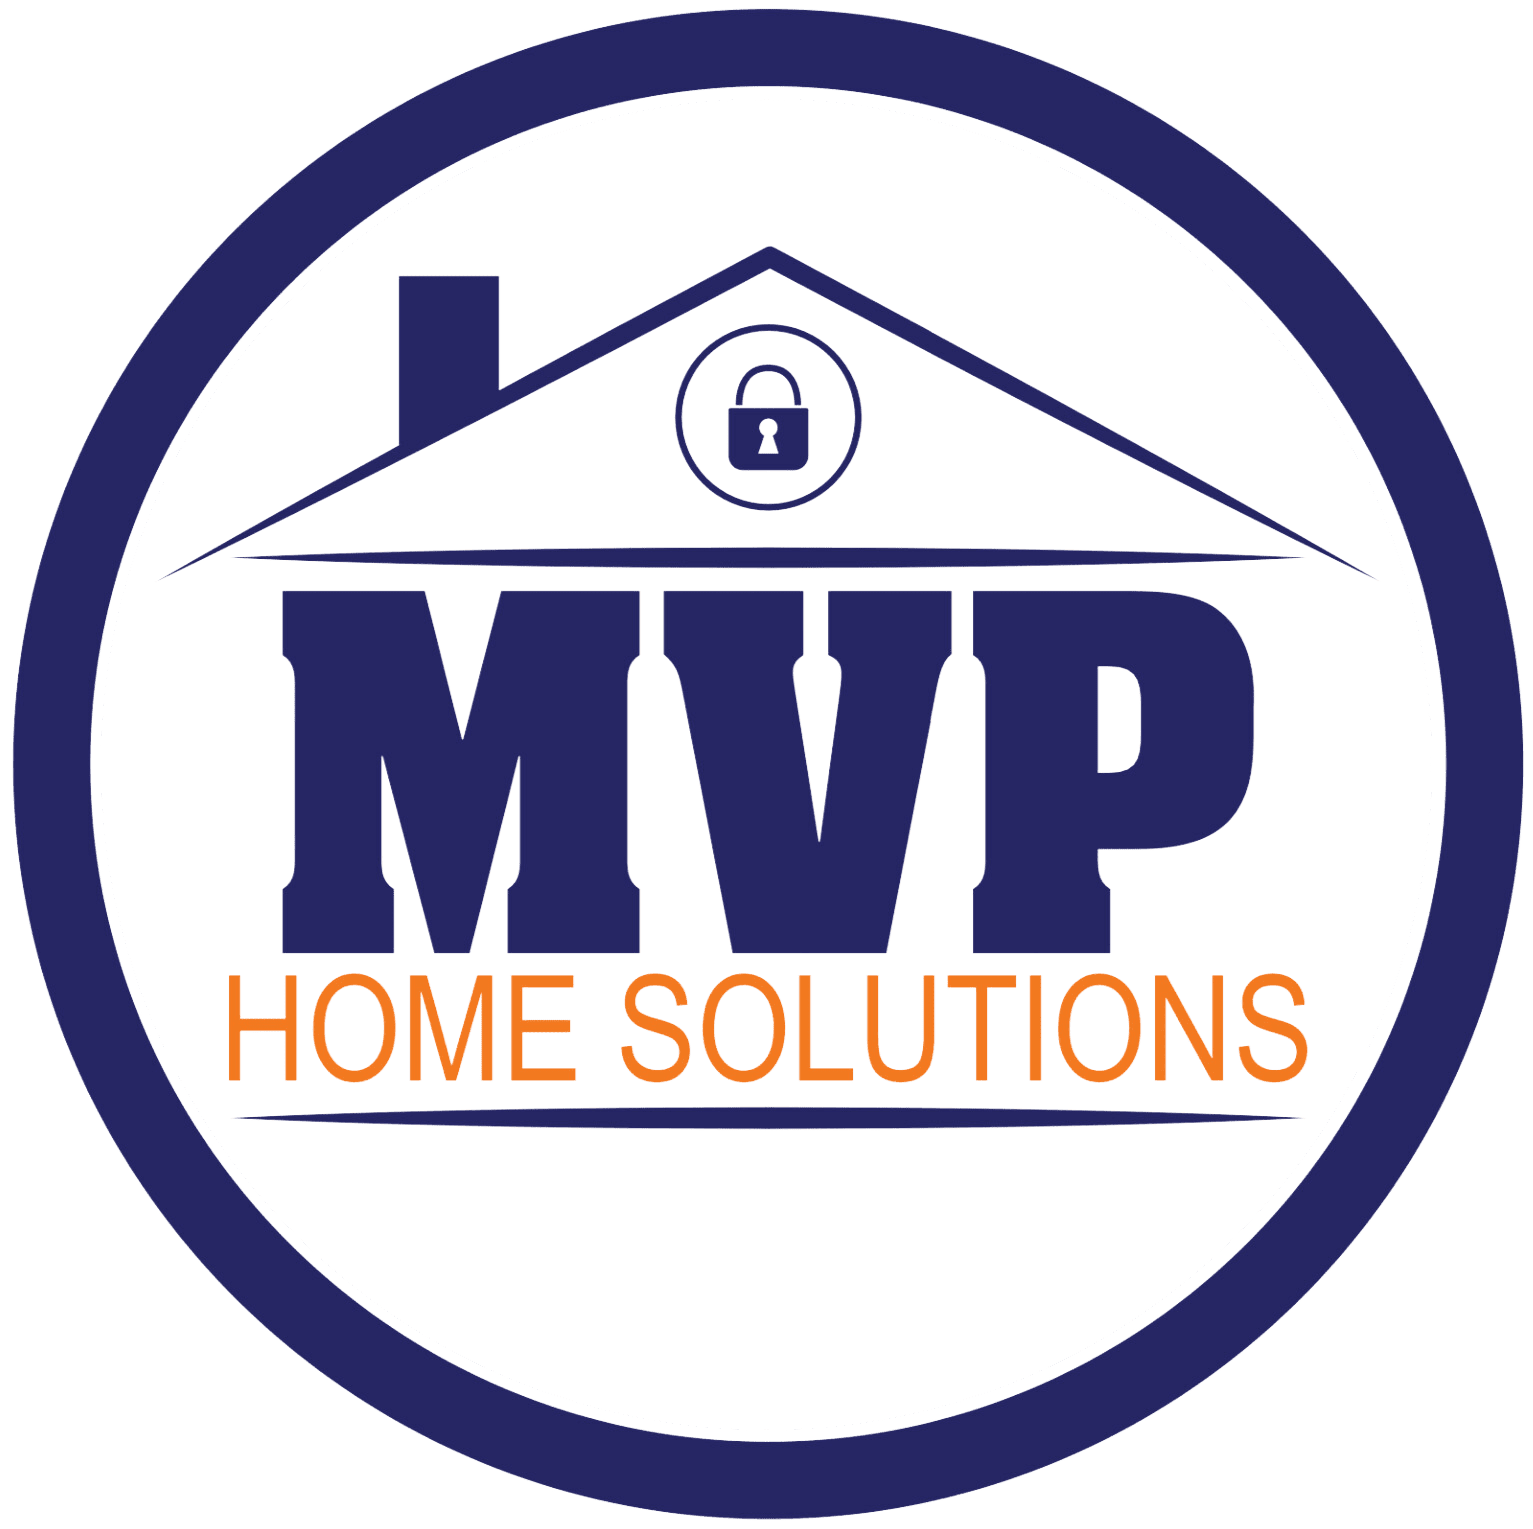 MVP Home Solutions Authorized Sales Agent Littleton